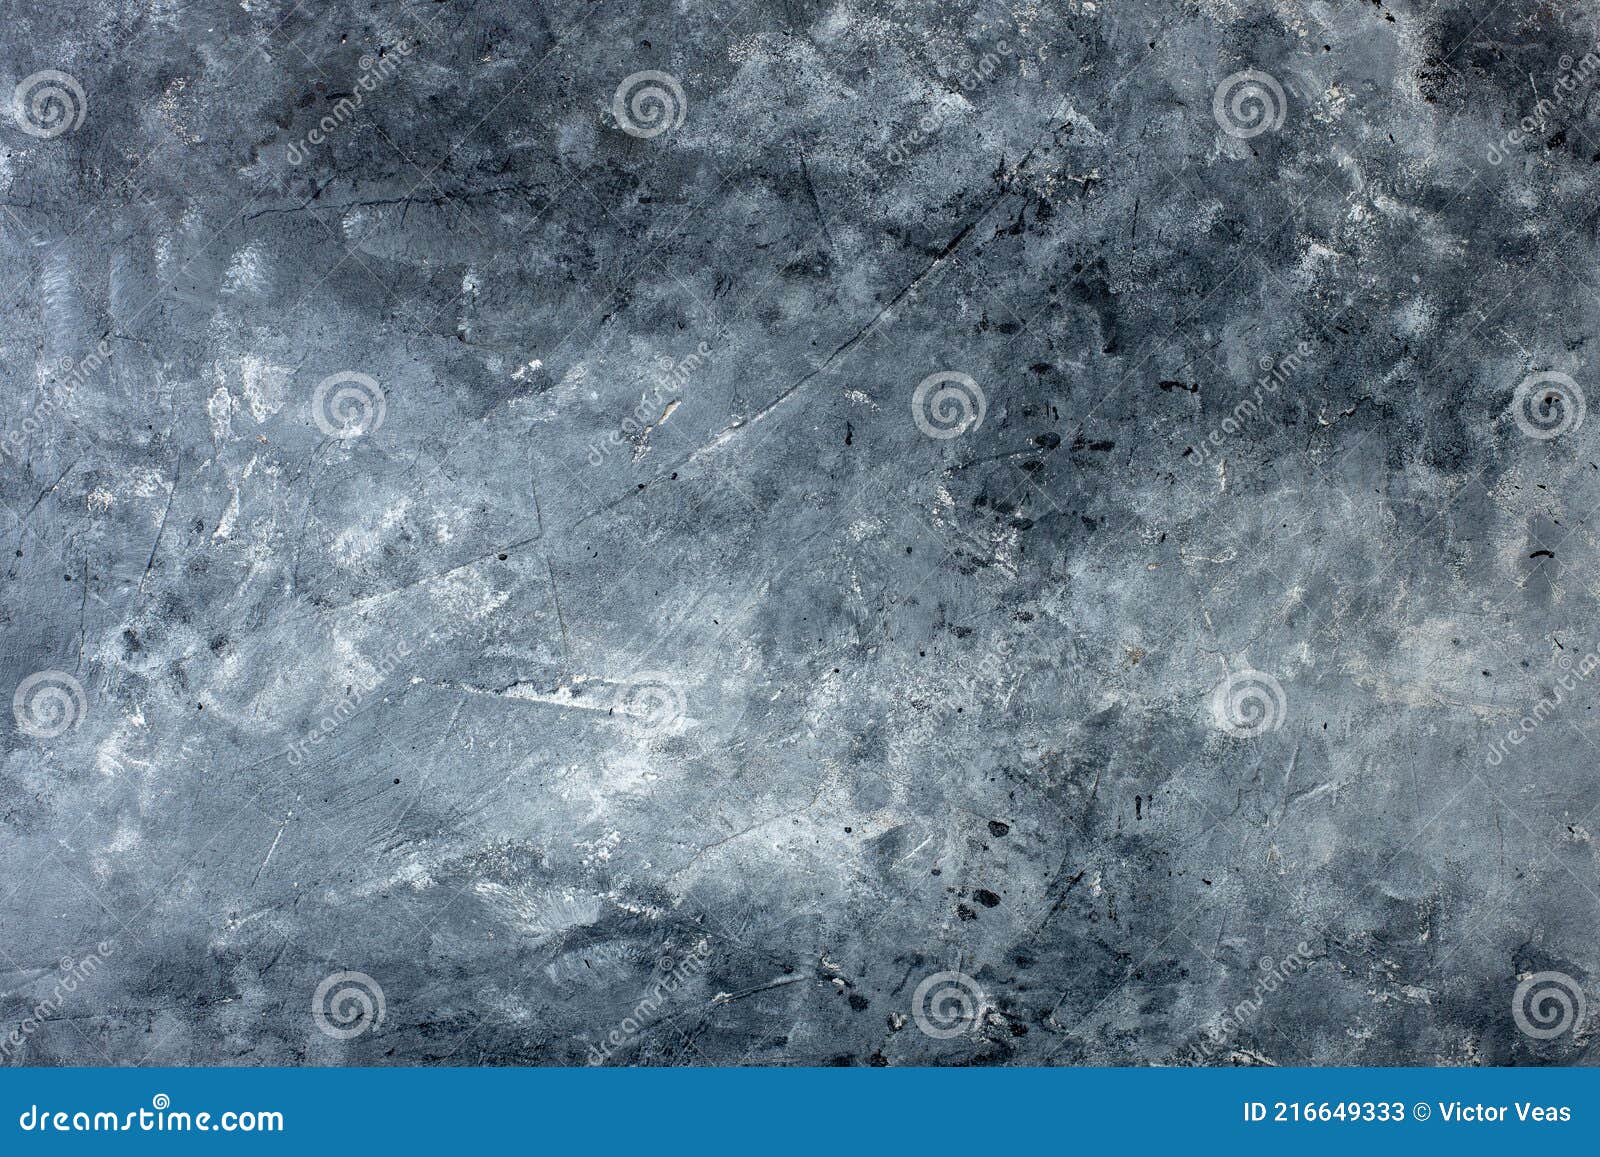 gray textured background surface with bluish highlights for digital s